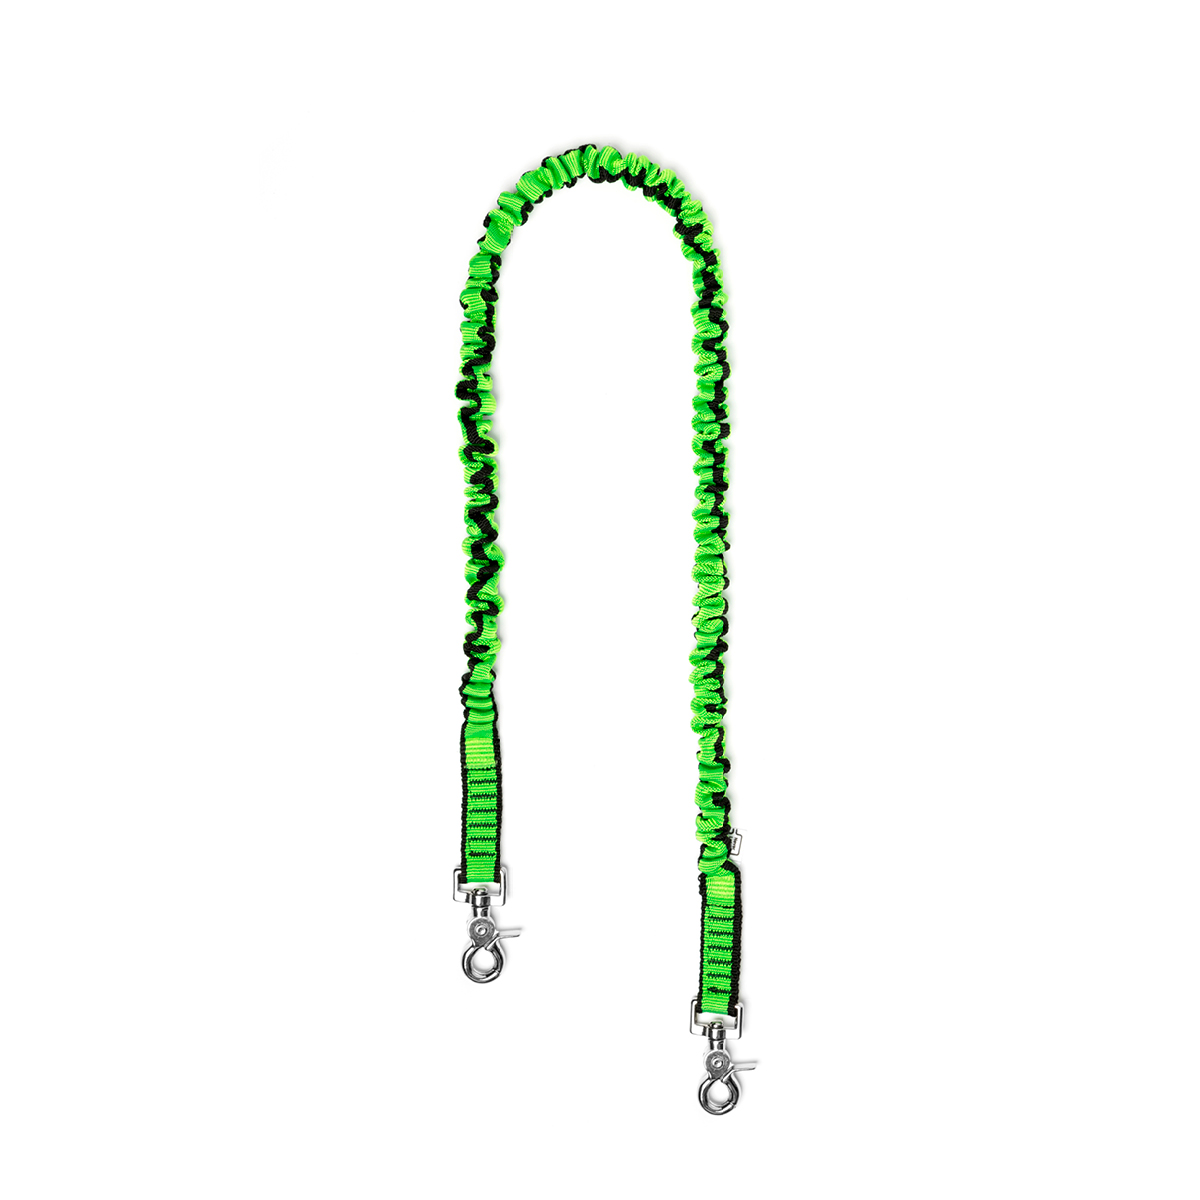 NLG Extended Bungee Tool Lanyard 101434